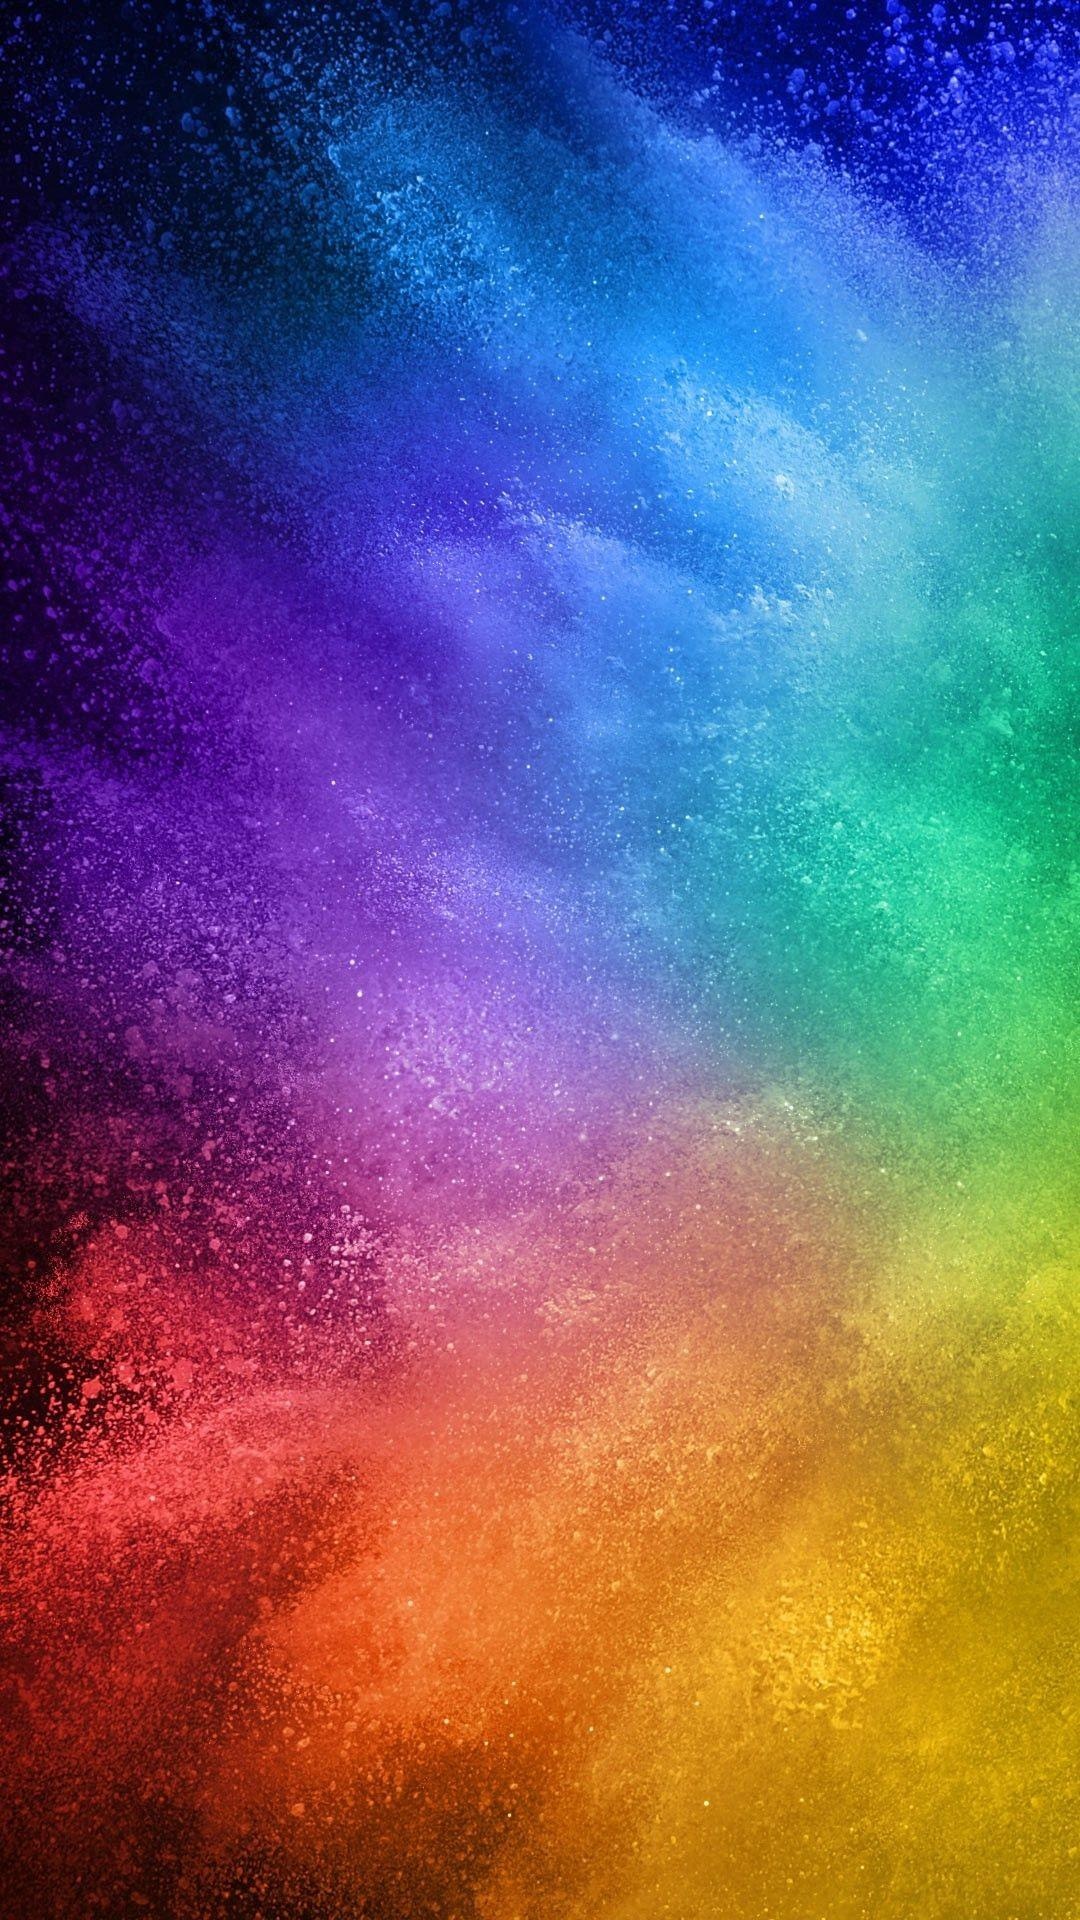 Rainbow iPhone wallpapers, Striking and bold, Colorful and bright, Eye-catching backgrounds, 1080x1920 Full HD Handy